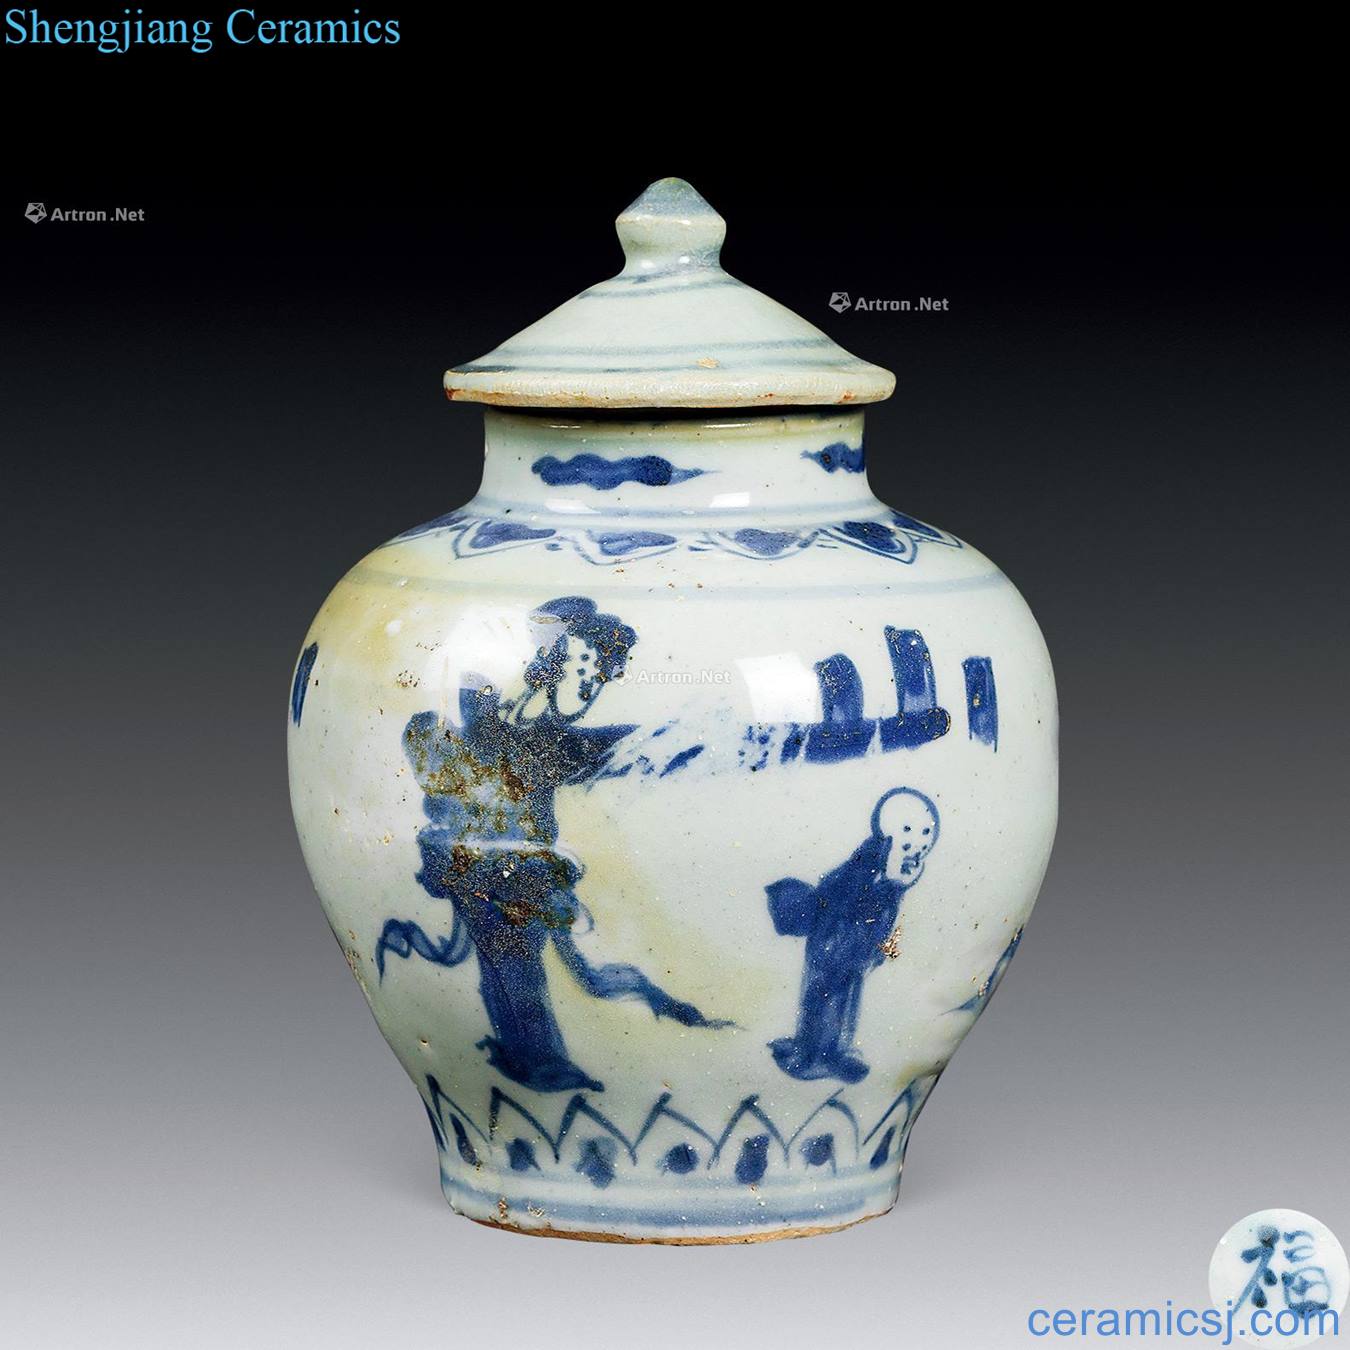 Ming wanli character "fu" character canister